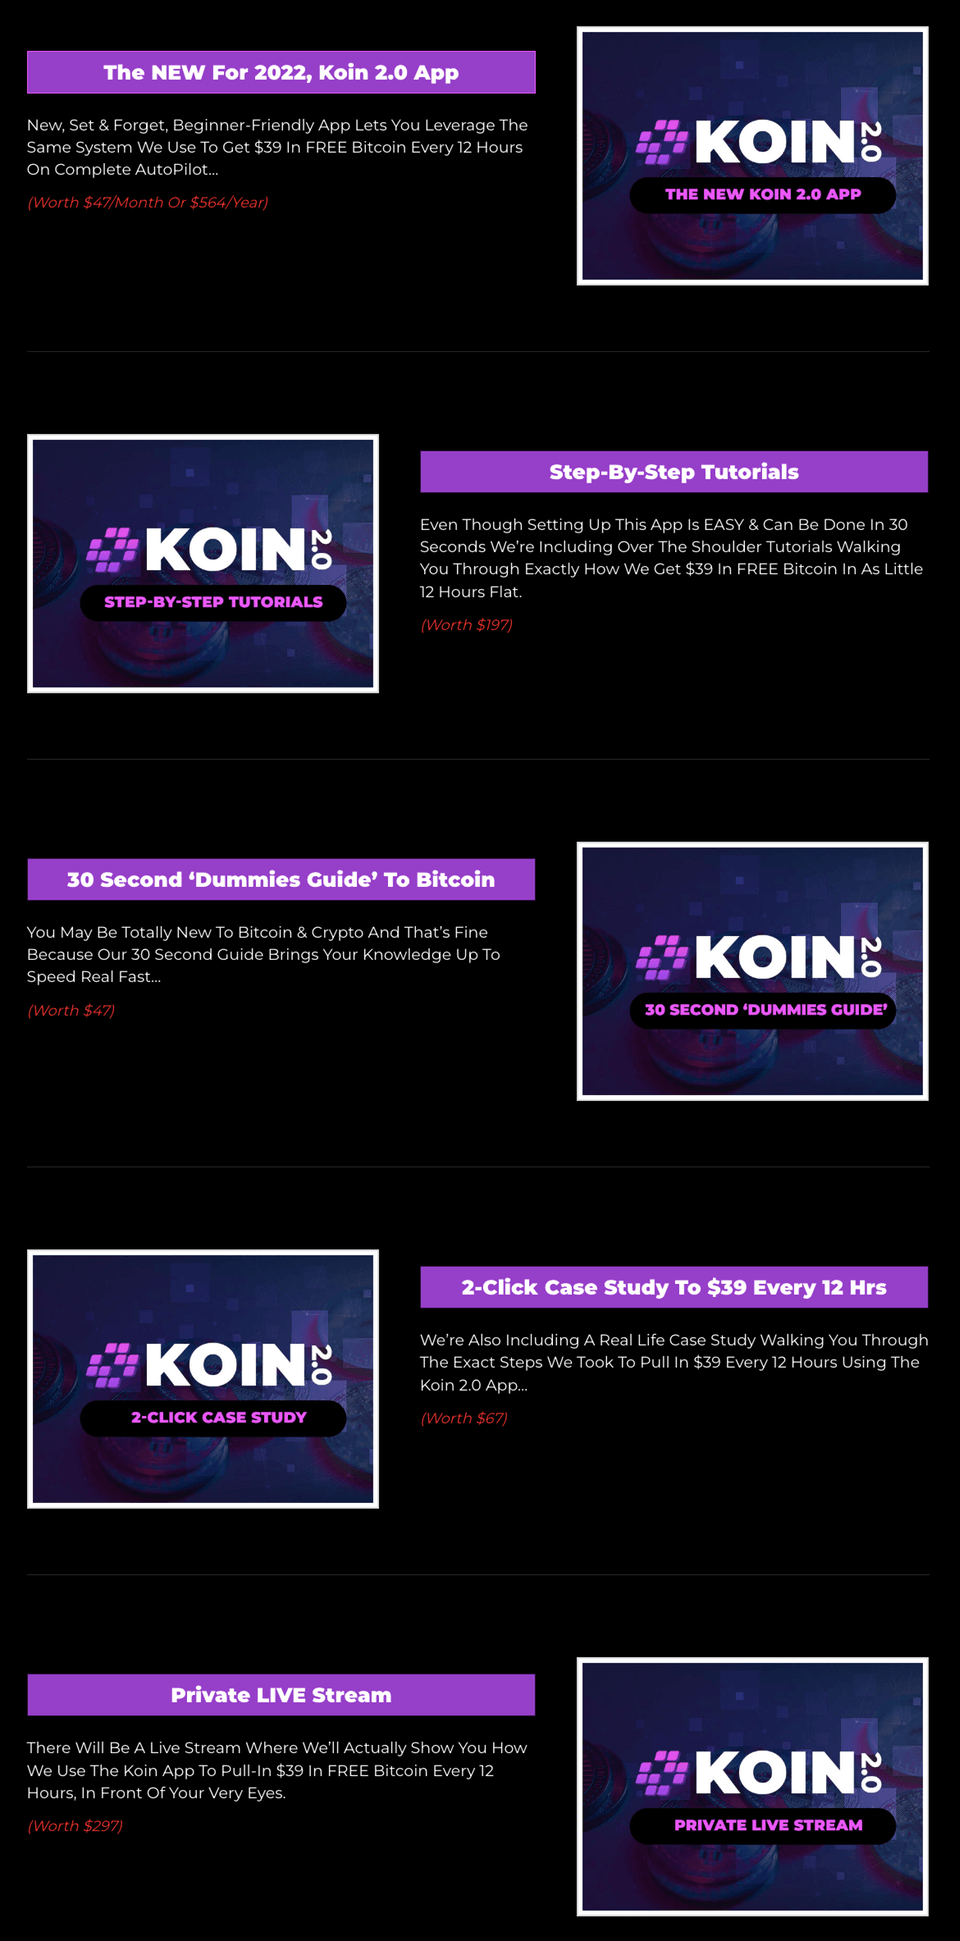 Koin-2.0-Feature